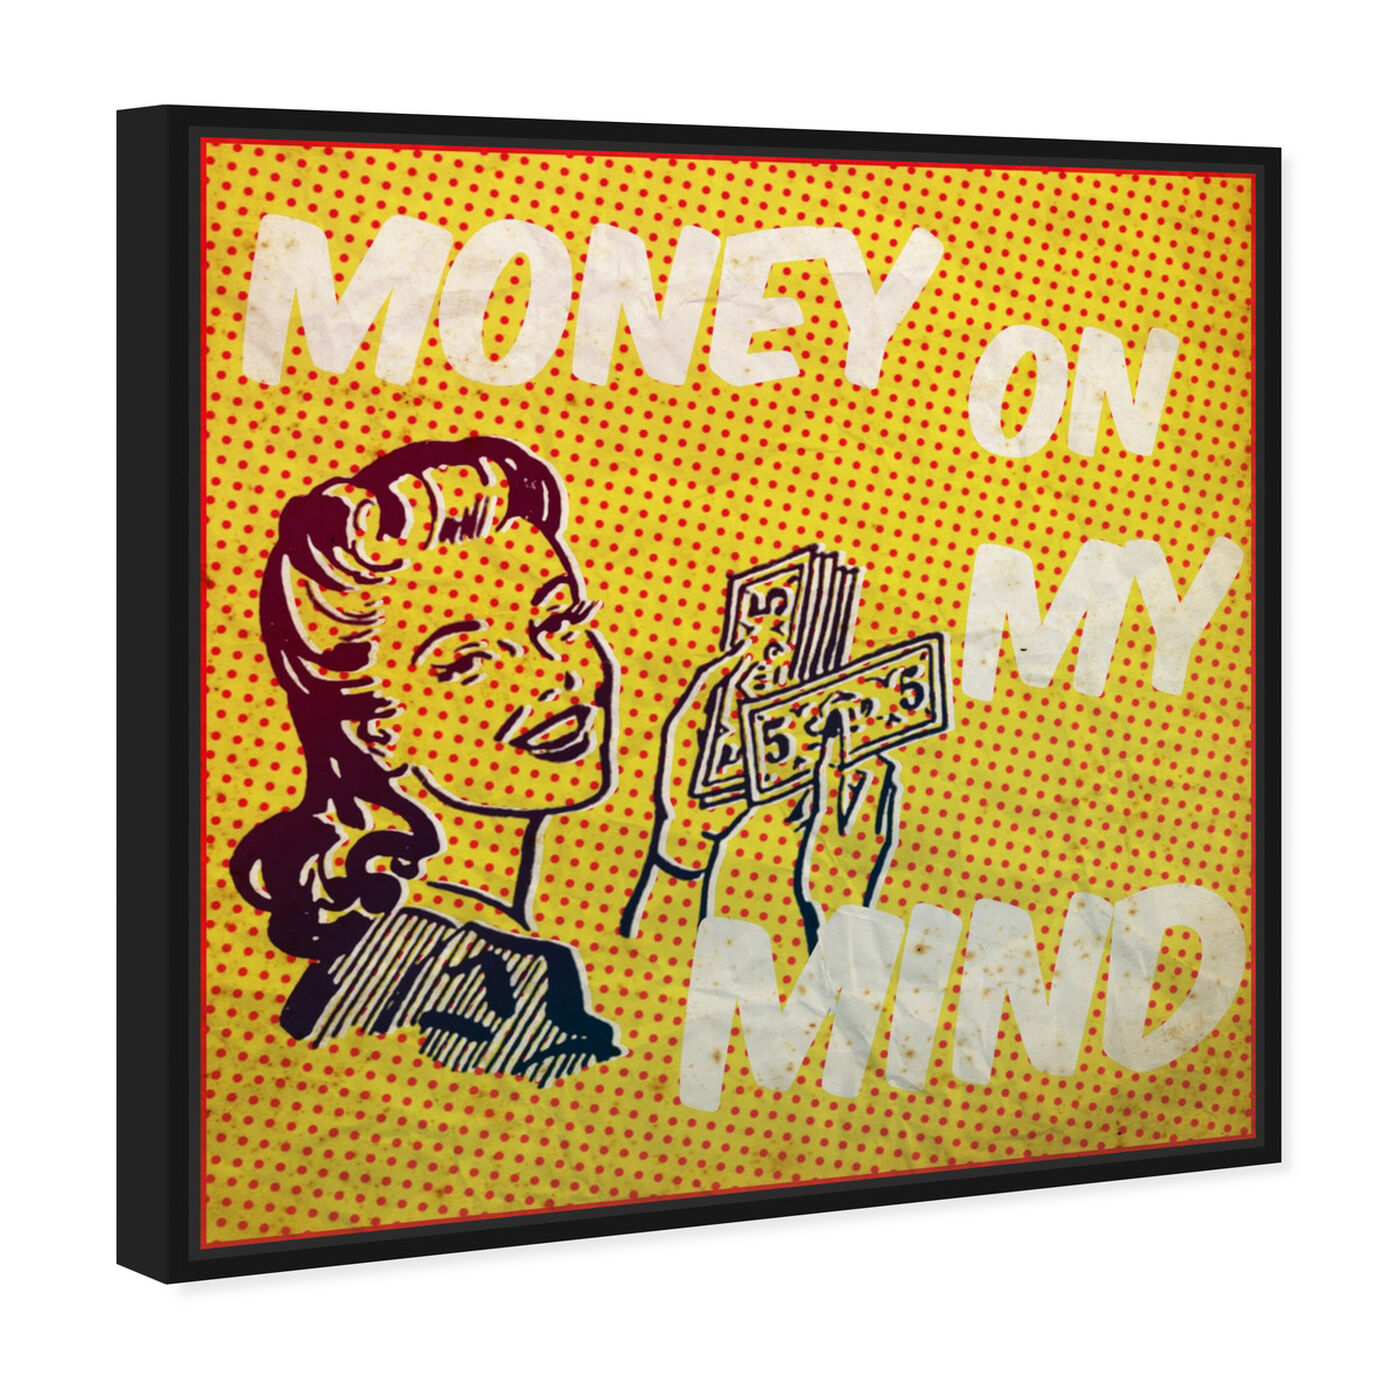 Angled view of Money on My Mind featuring advertising and comics art.